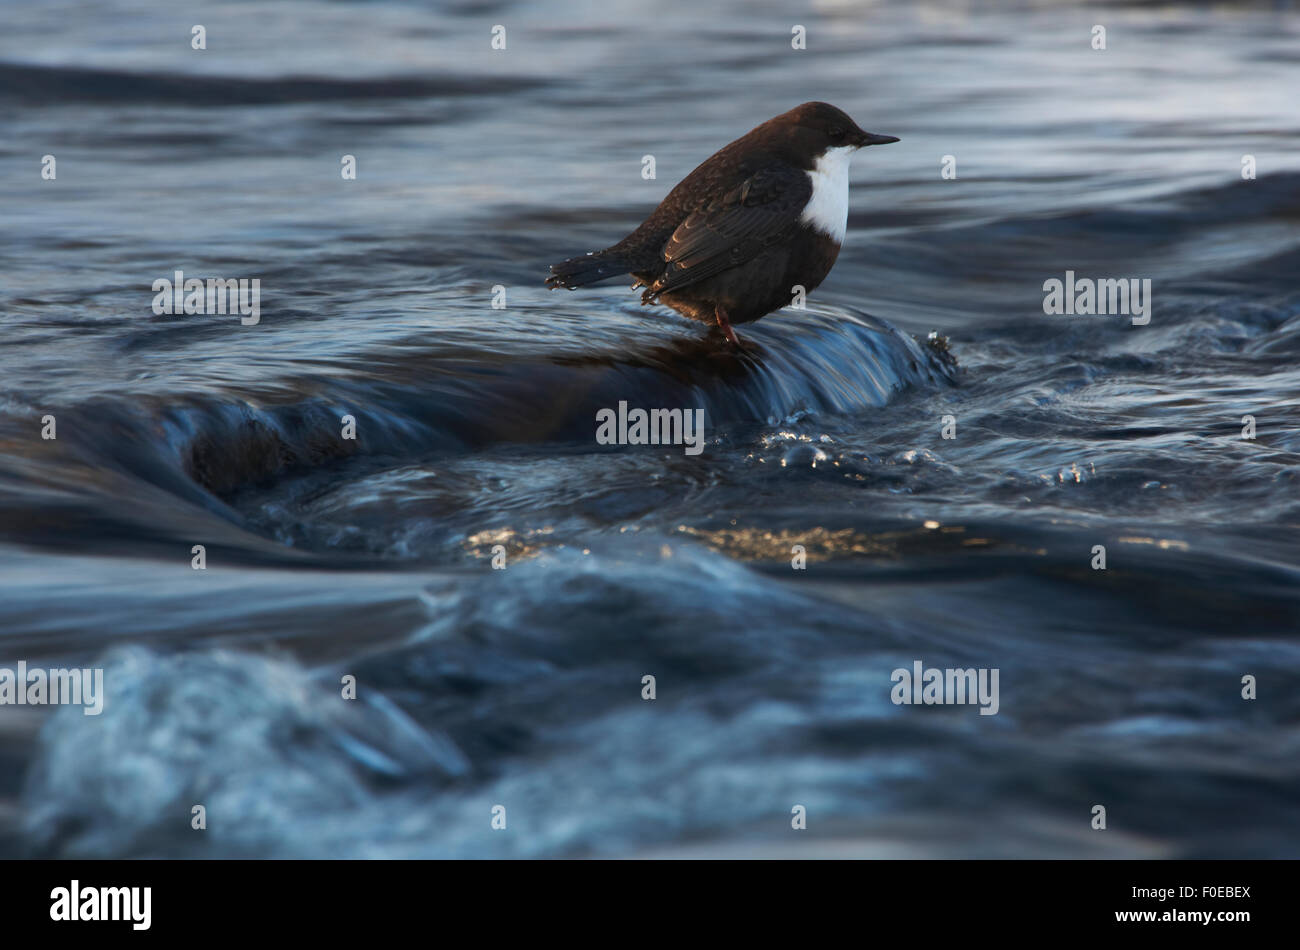 White-throated dipper (Cinclus cinclus) standing in water flowing over rocks, Kitkajoki River, Finland, February 2009 Stock Photo